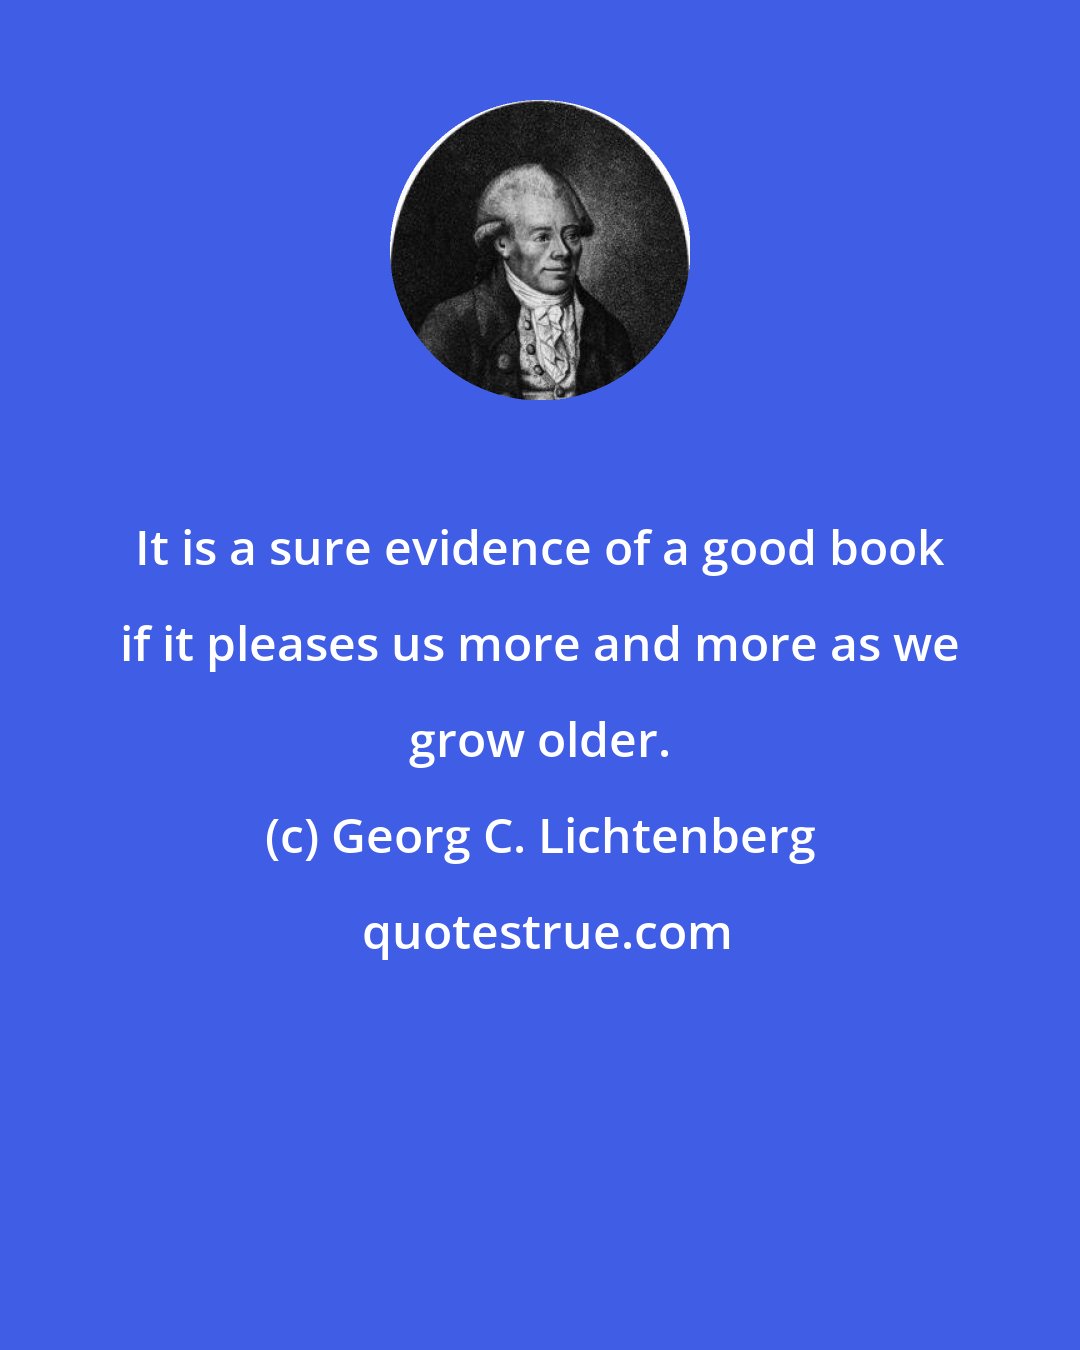 Georg C. Lichtenberg: It is a sure evidence of a good book if it pleases us more and more as we grow older.